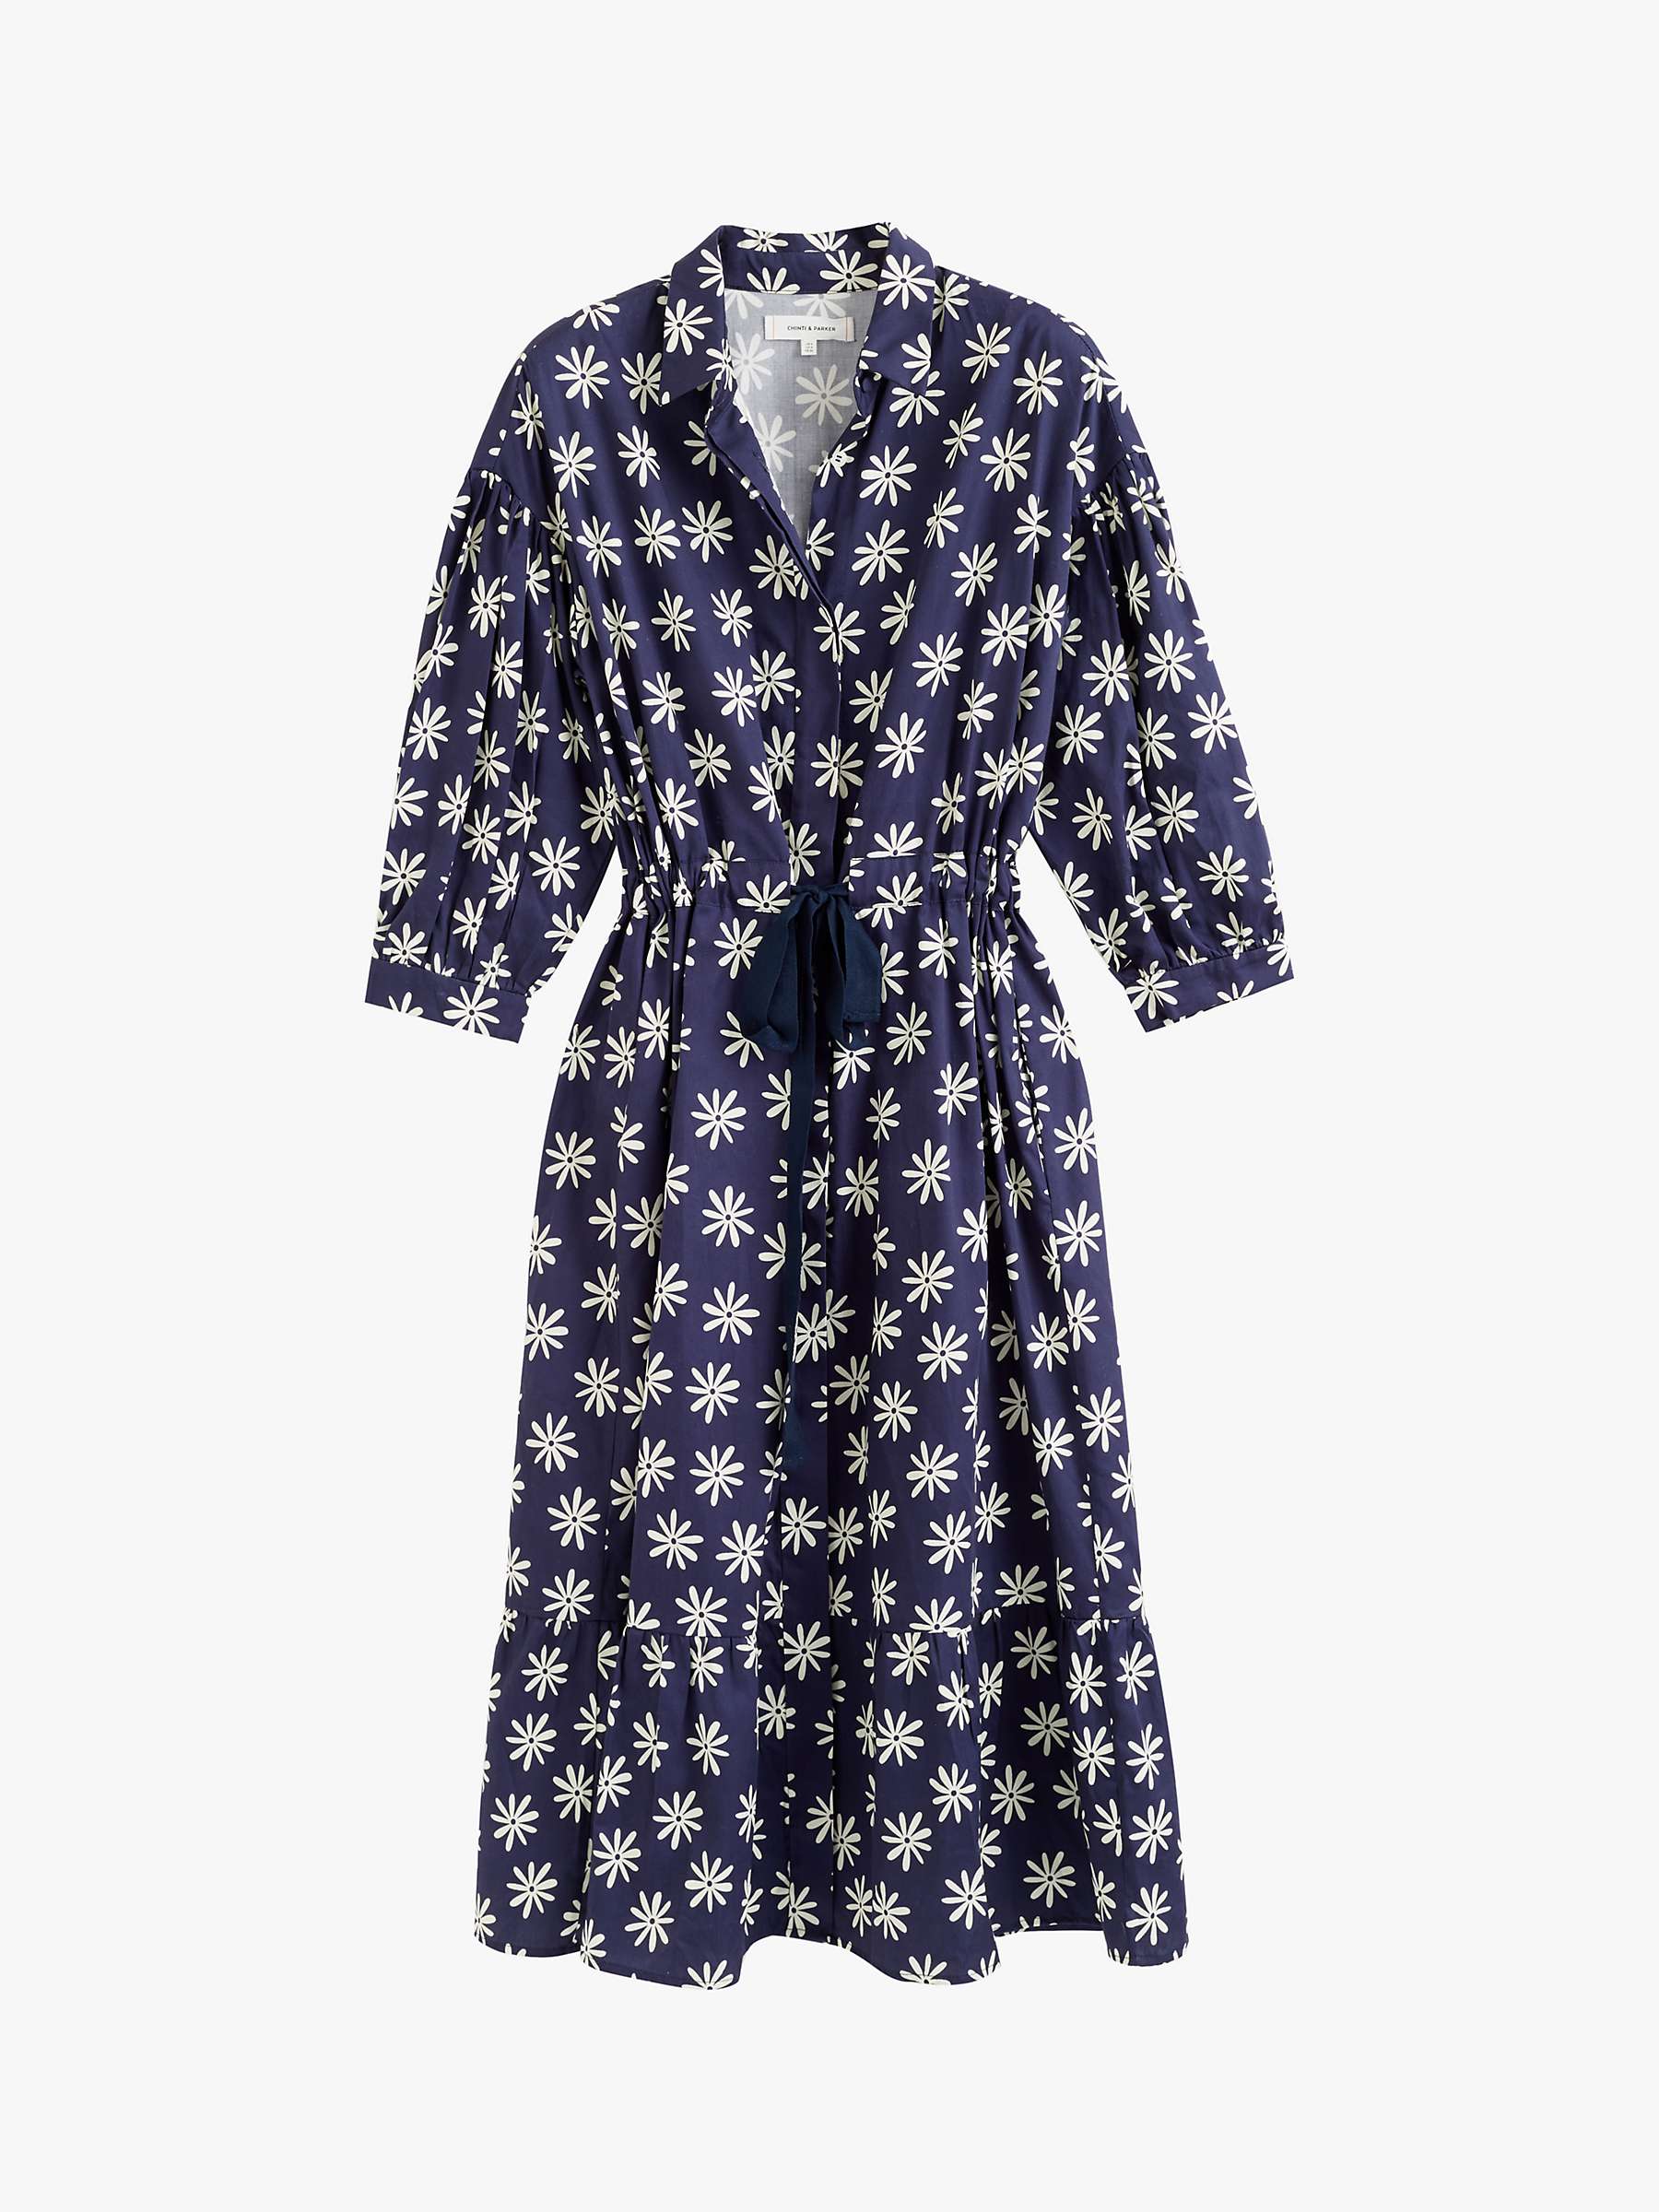 Buy Chinti & Parker Ditsy Floral Midi Dress, Navy/Cream Online at johnlewis.com